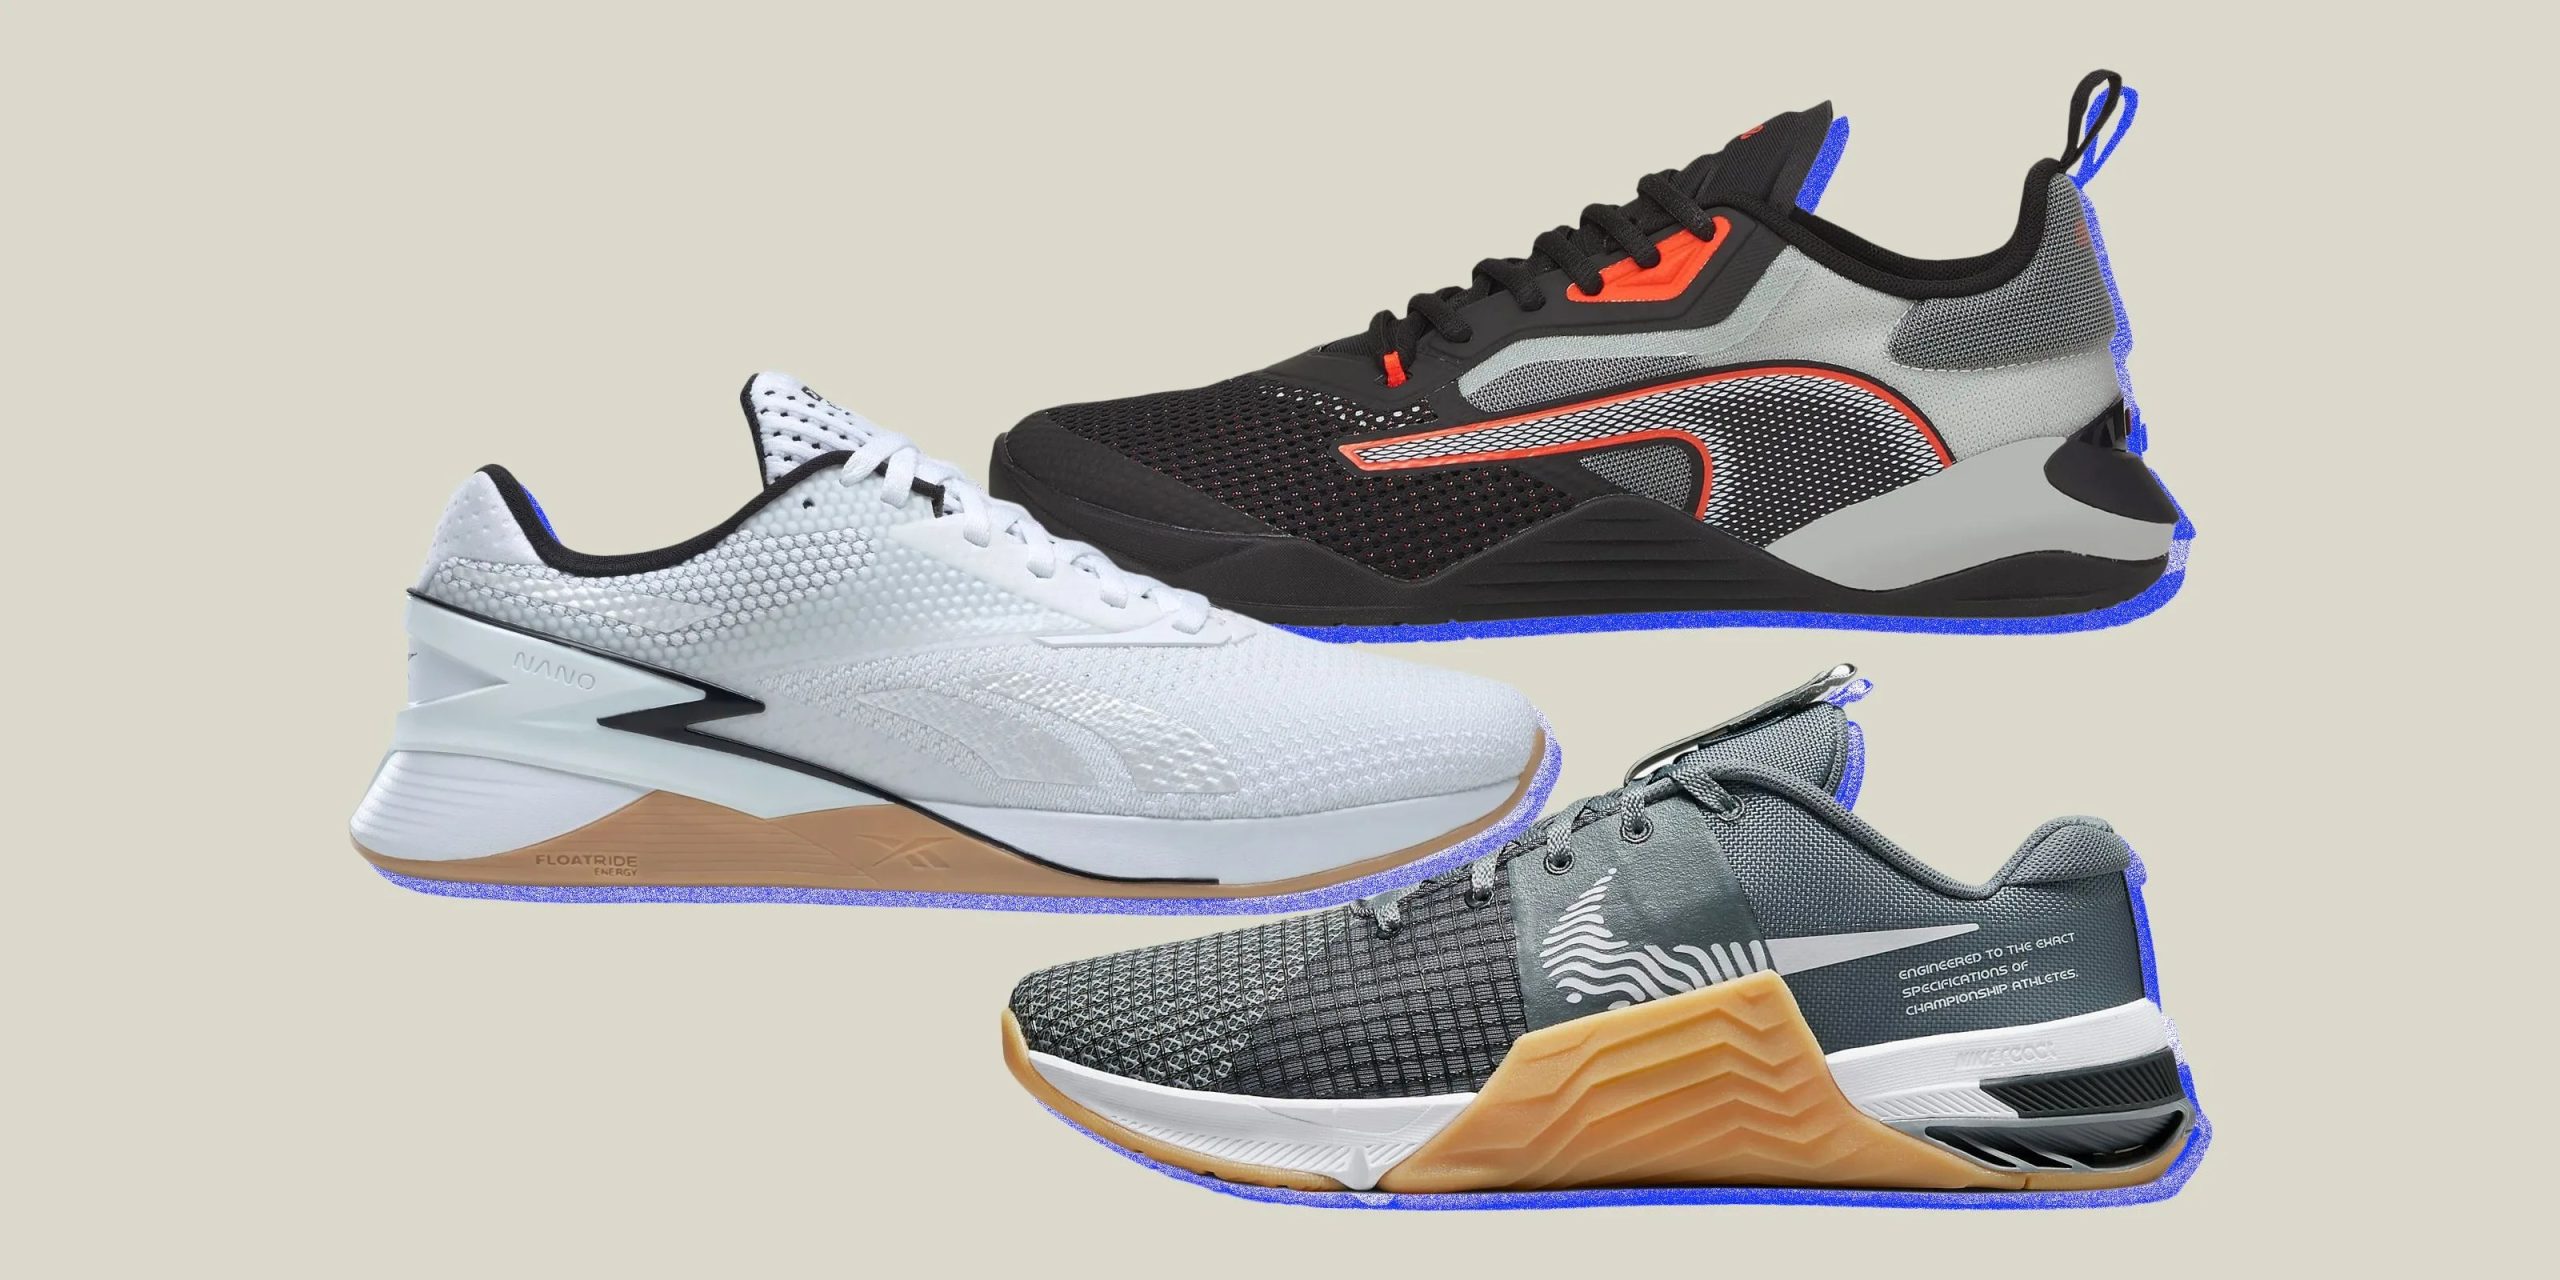 What is the Difference between Basketball Shoes And Volleyball Shoes?